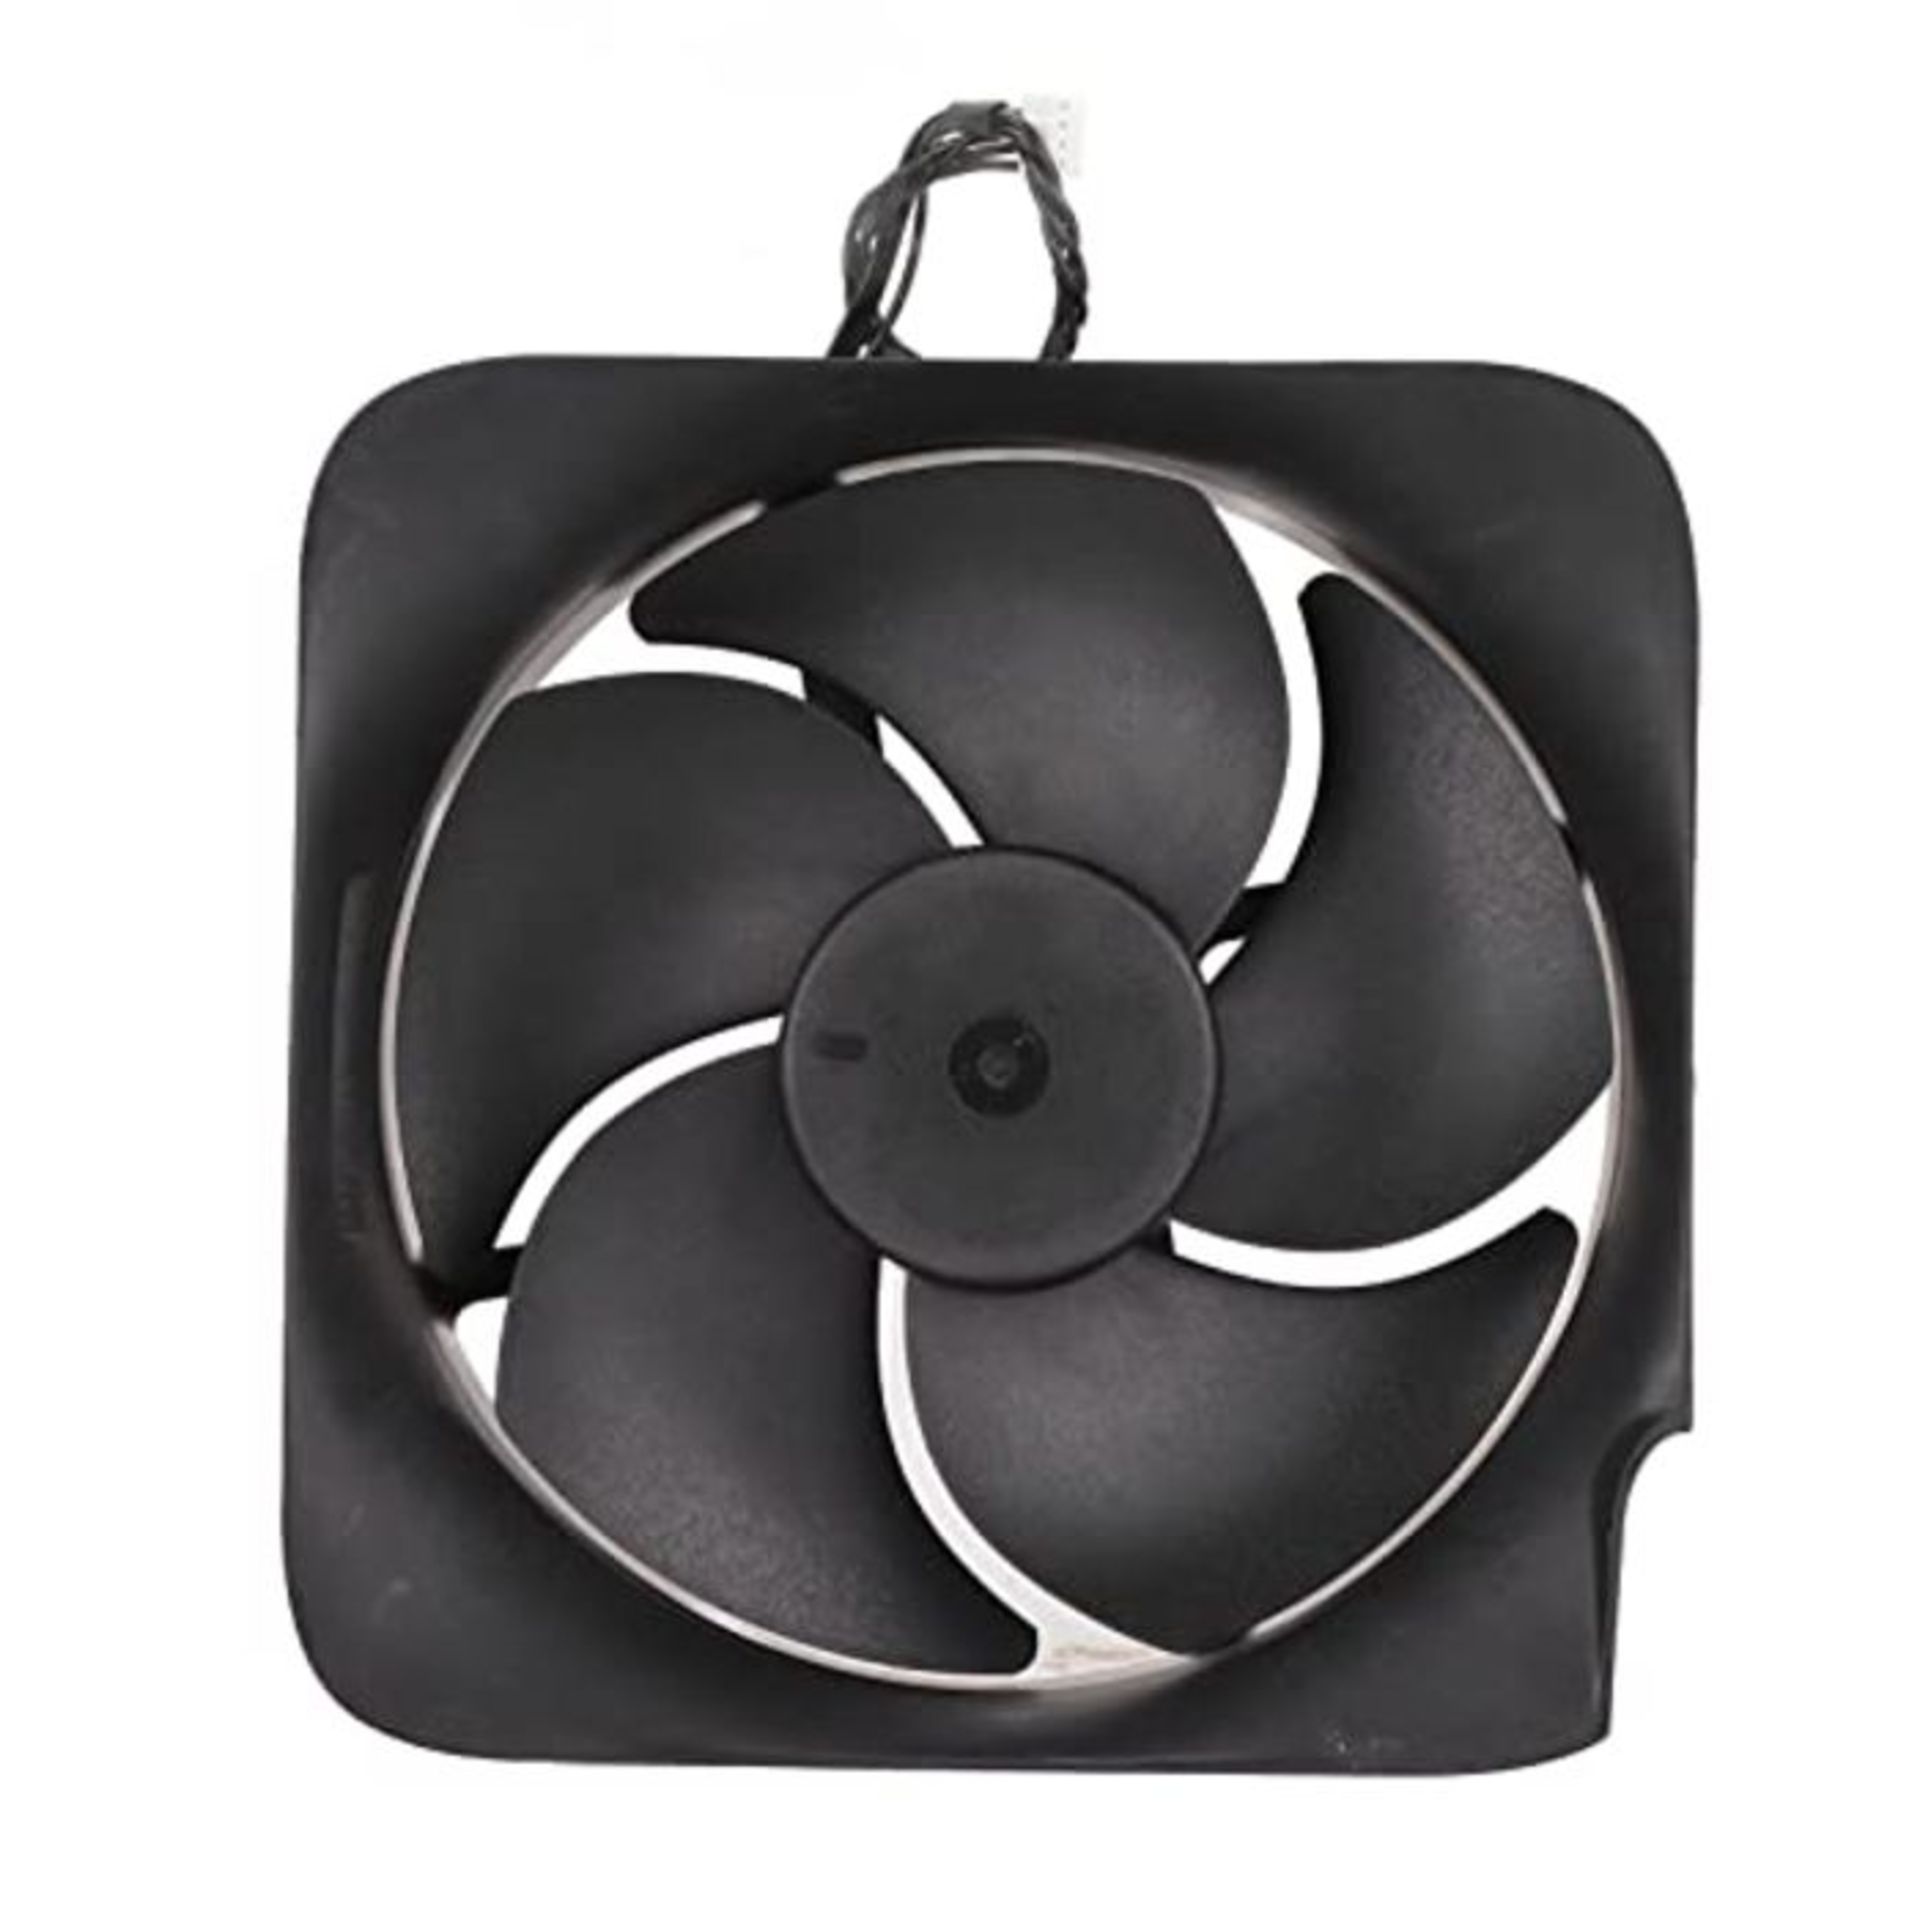 Bewinner Internal Cooling Fan Replacement for Xbox Series X, Portable Silent Heat Diss